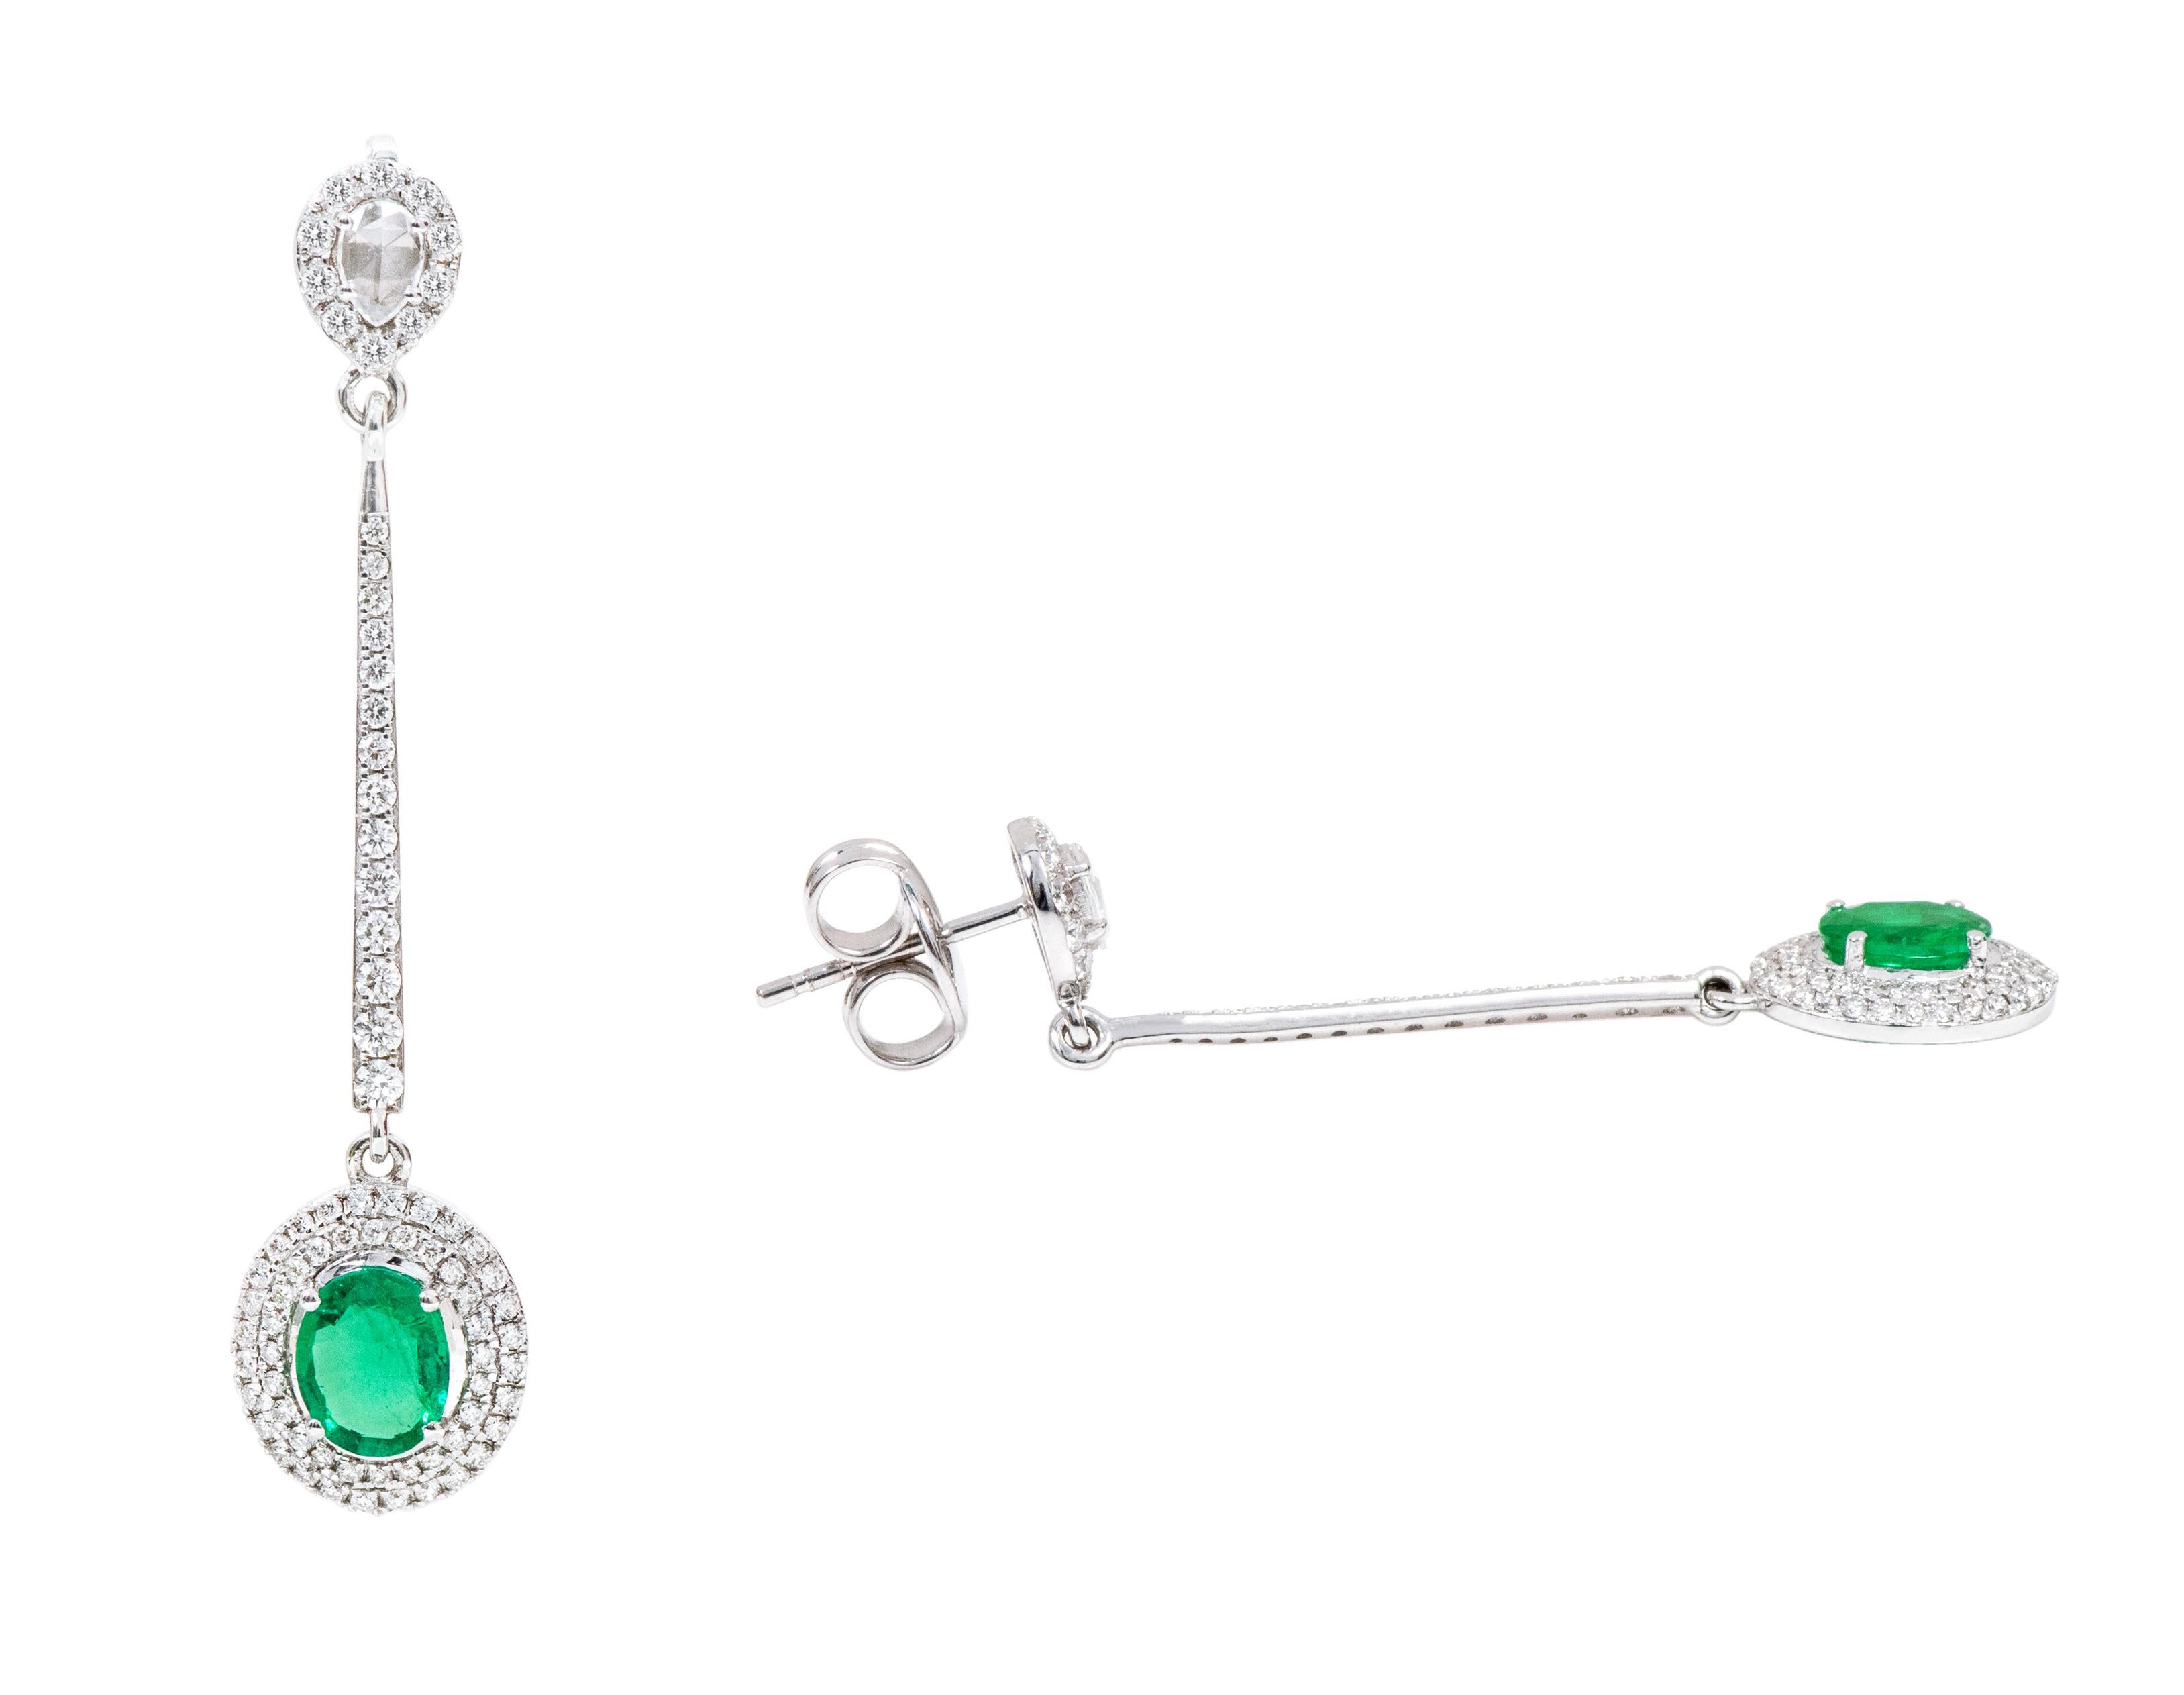 18 Karat White Gold Natural Emerald and Diamond Cluster Dangle Earrings

This sensational shamrock green emerald and diamond long earring is a beautifully crafted pair. The rose cut diamond pear solitaire stud surrounded with the classic micro-pave